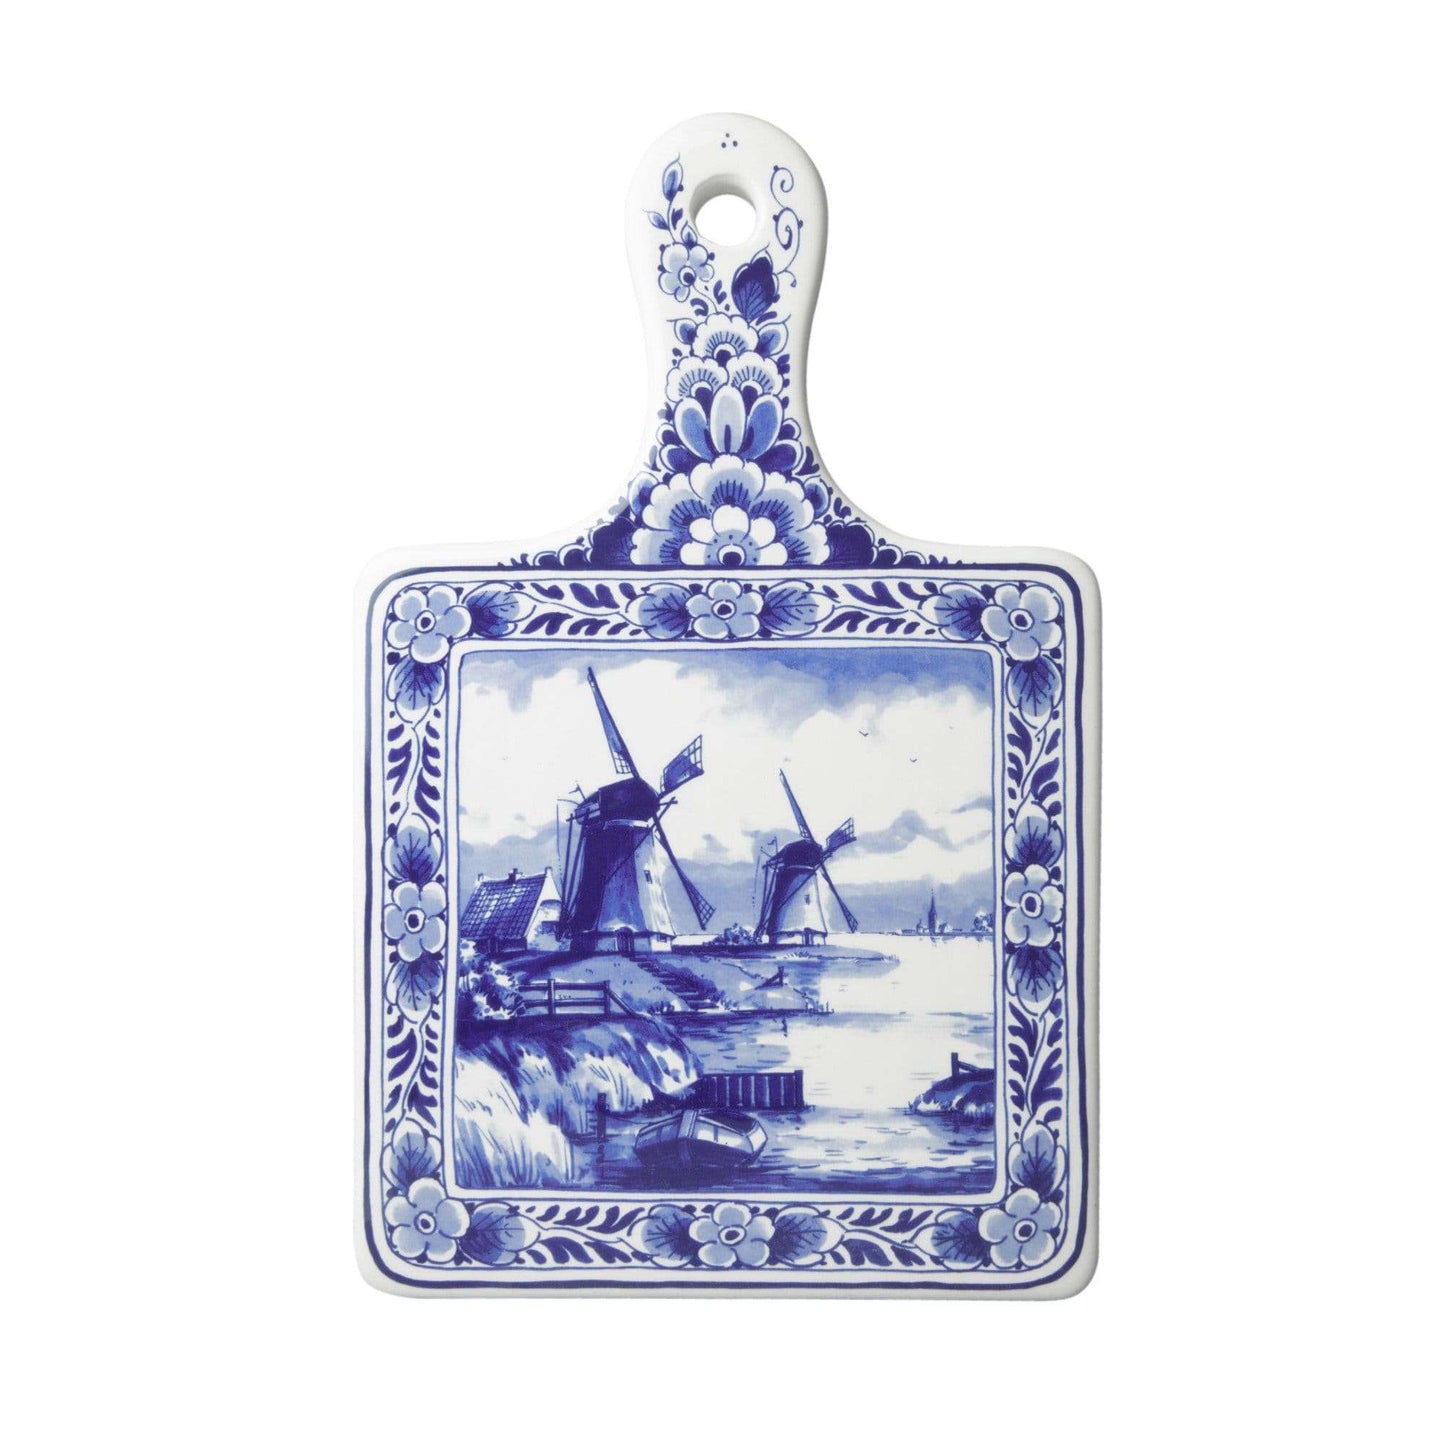 Delft Blue Cheese Board with Windmills, Large